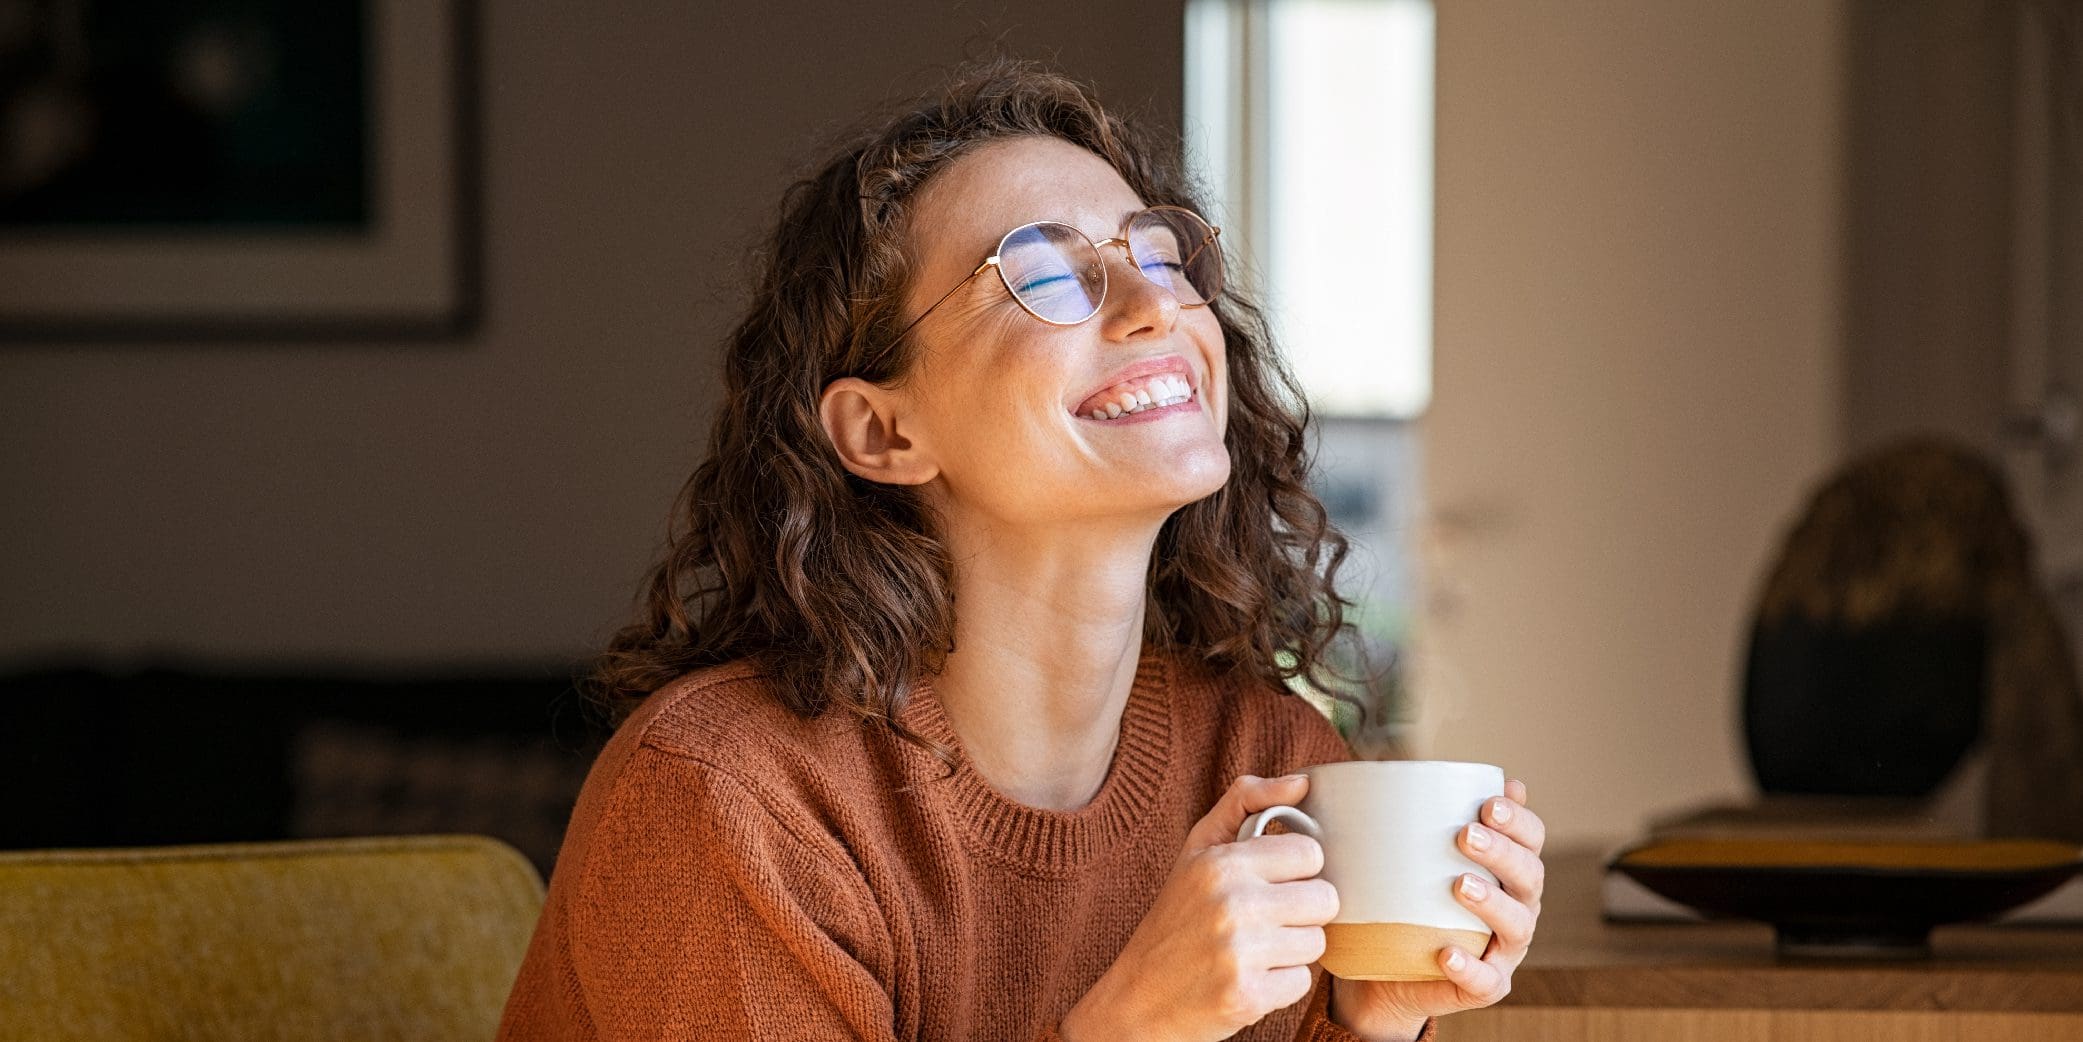 Joyful and Smiling Young Woman Enjoying a Cup of Coffee at Home